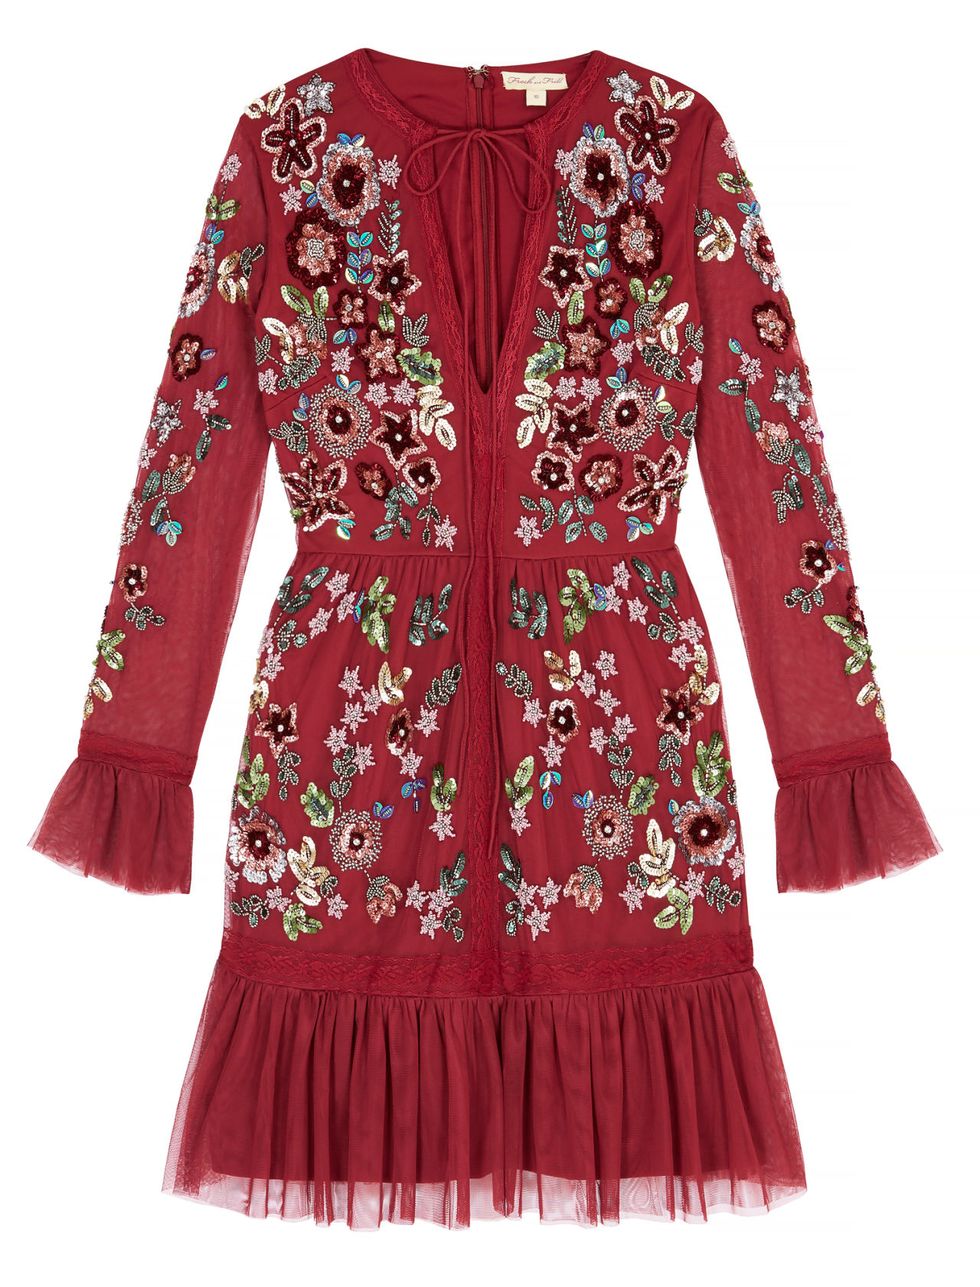 Clothing, Sleeve, Outerwear, Red, Dress, Neck, Top, Blouse, Cardigan, Embroidery, 